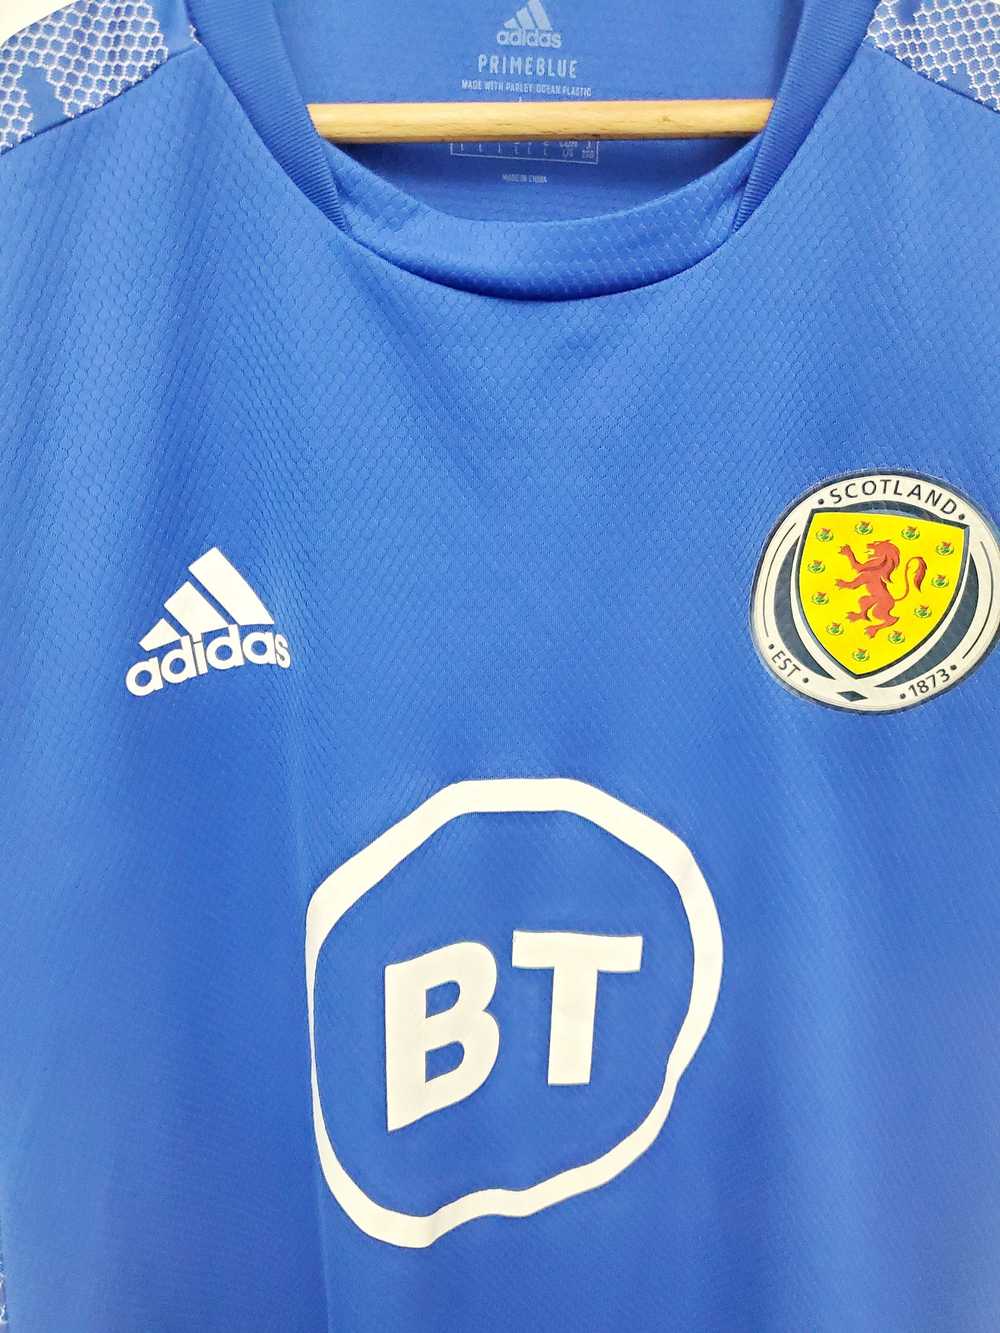 Adidas × Soccer Jersey 2021-22 Scotland Player Is… - image 2